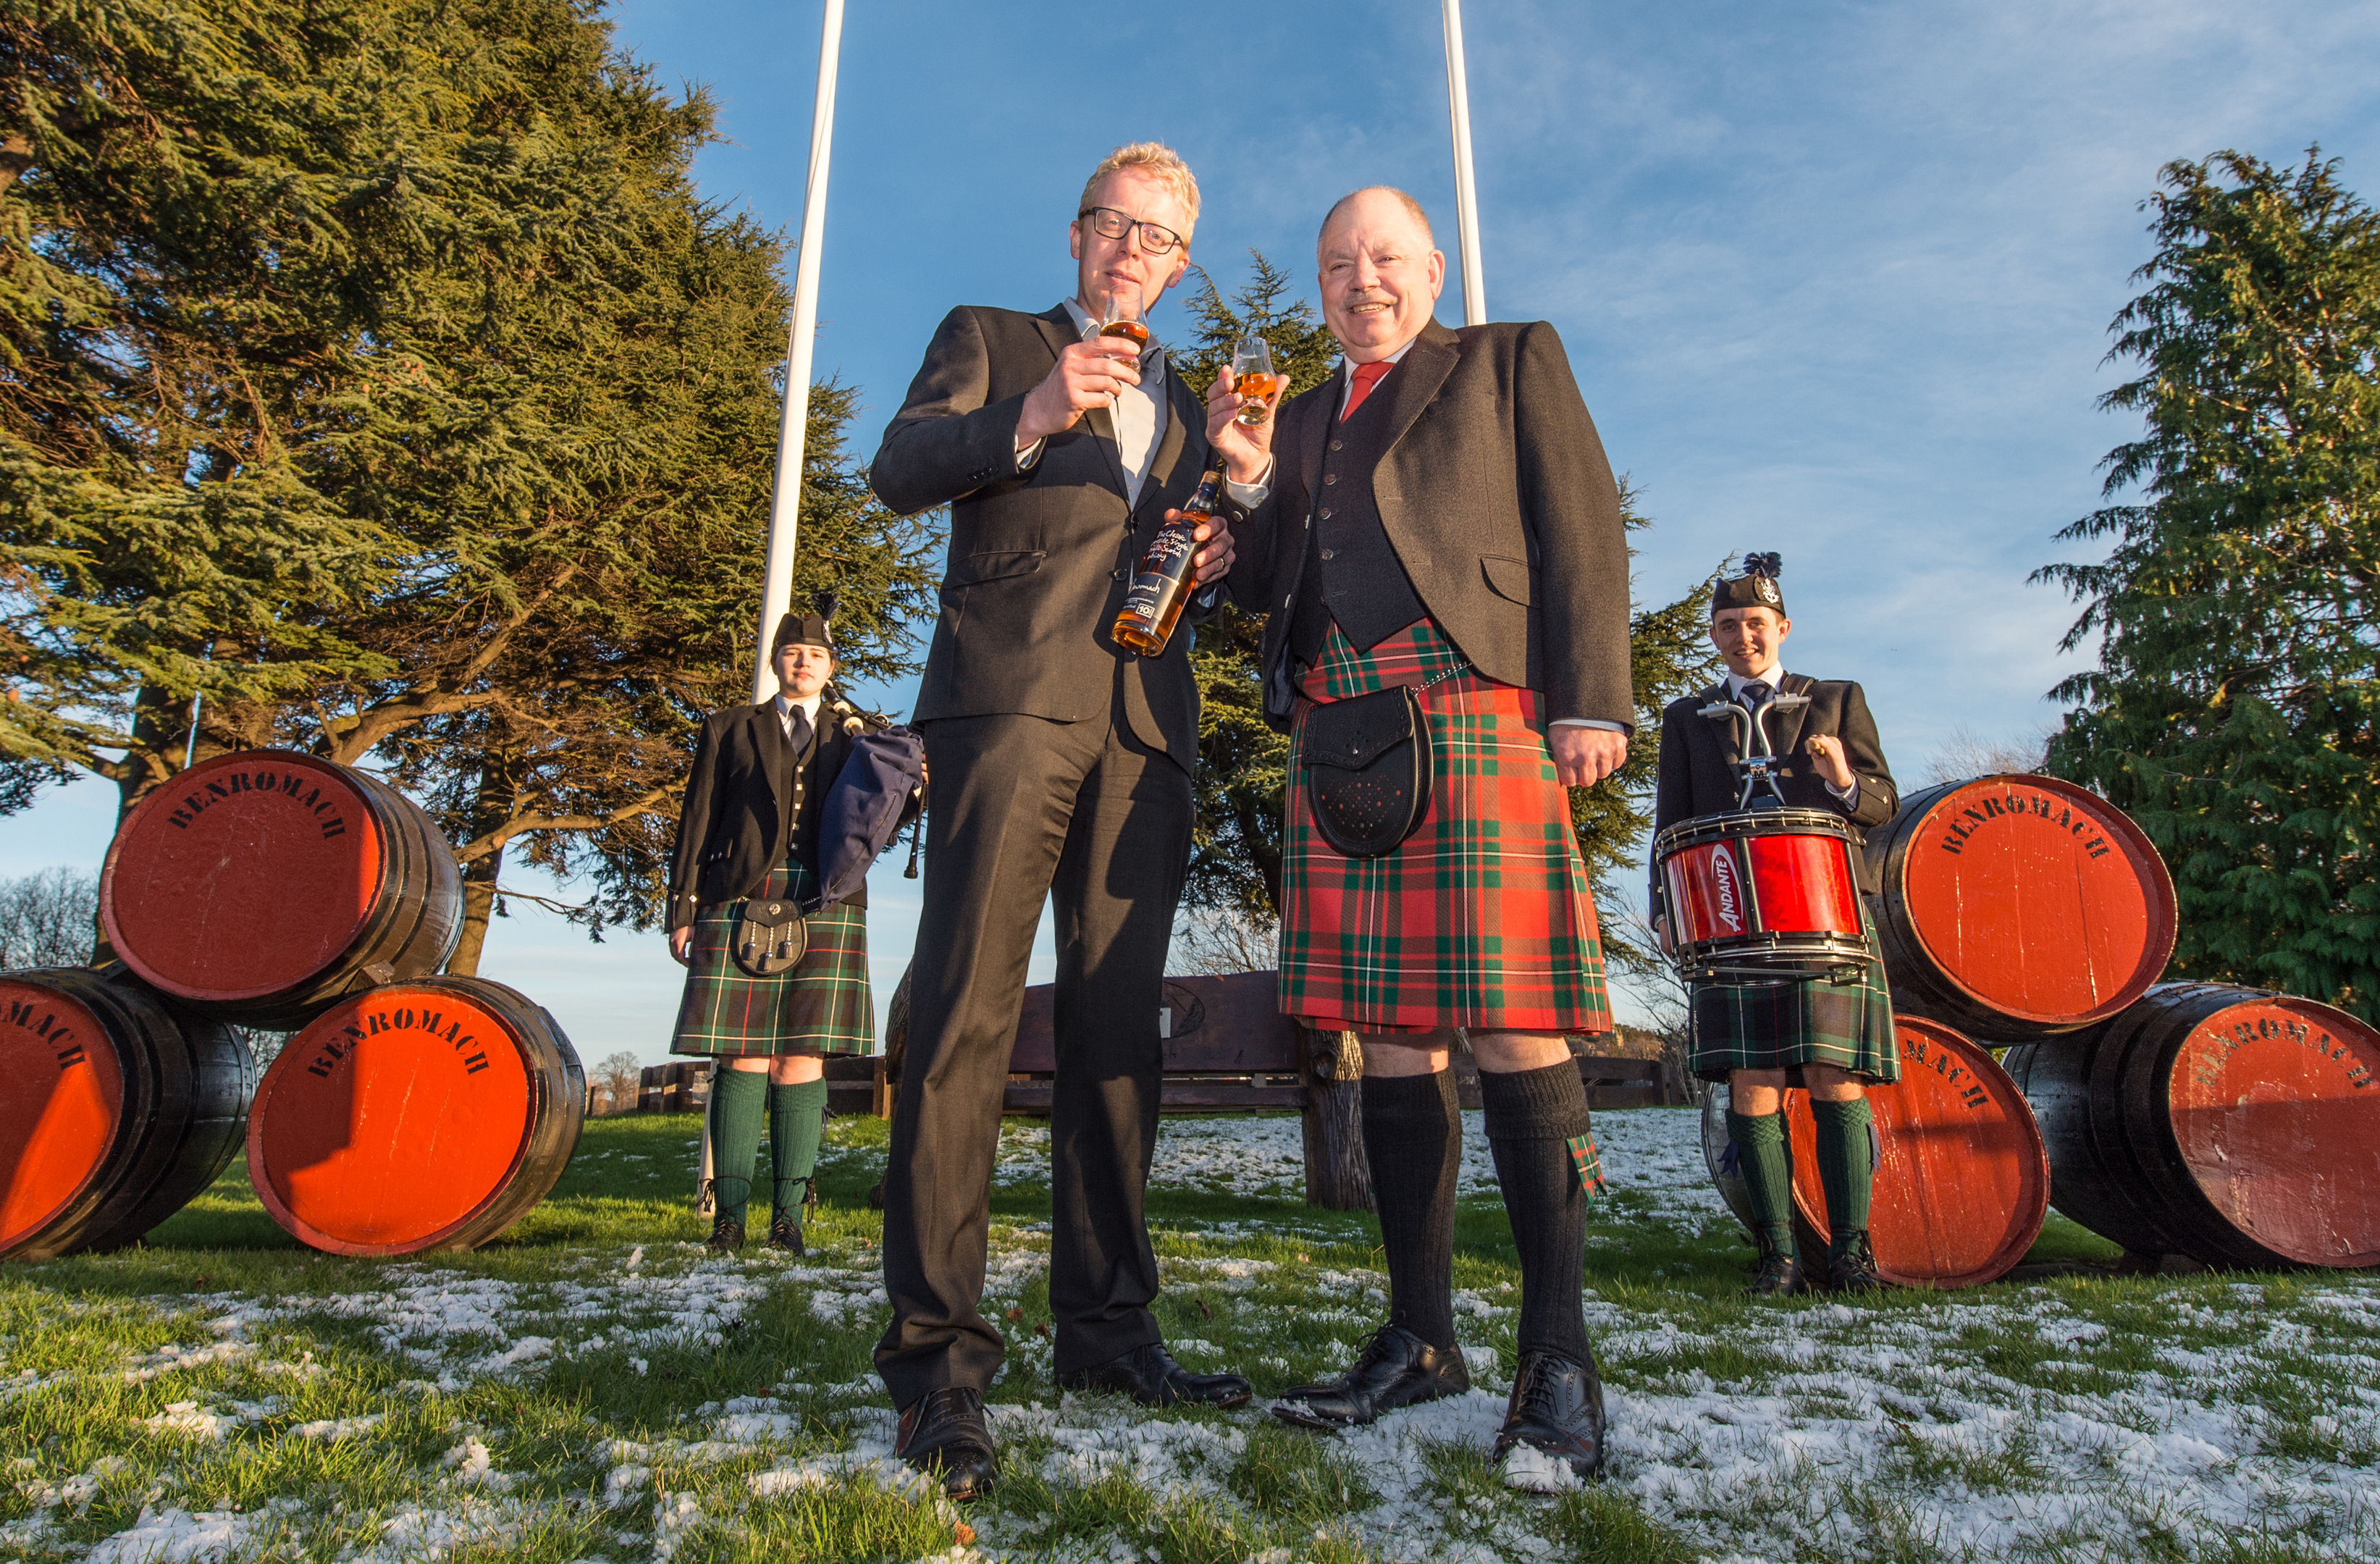 The new Chieftan of piping at Forres, Mr Alan James pictured at Ben Romach Distillery (Right) and accompanied by Ian Chapman (Left) MD of Ben Romach Distillery.